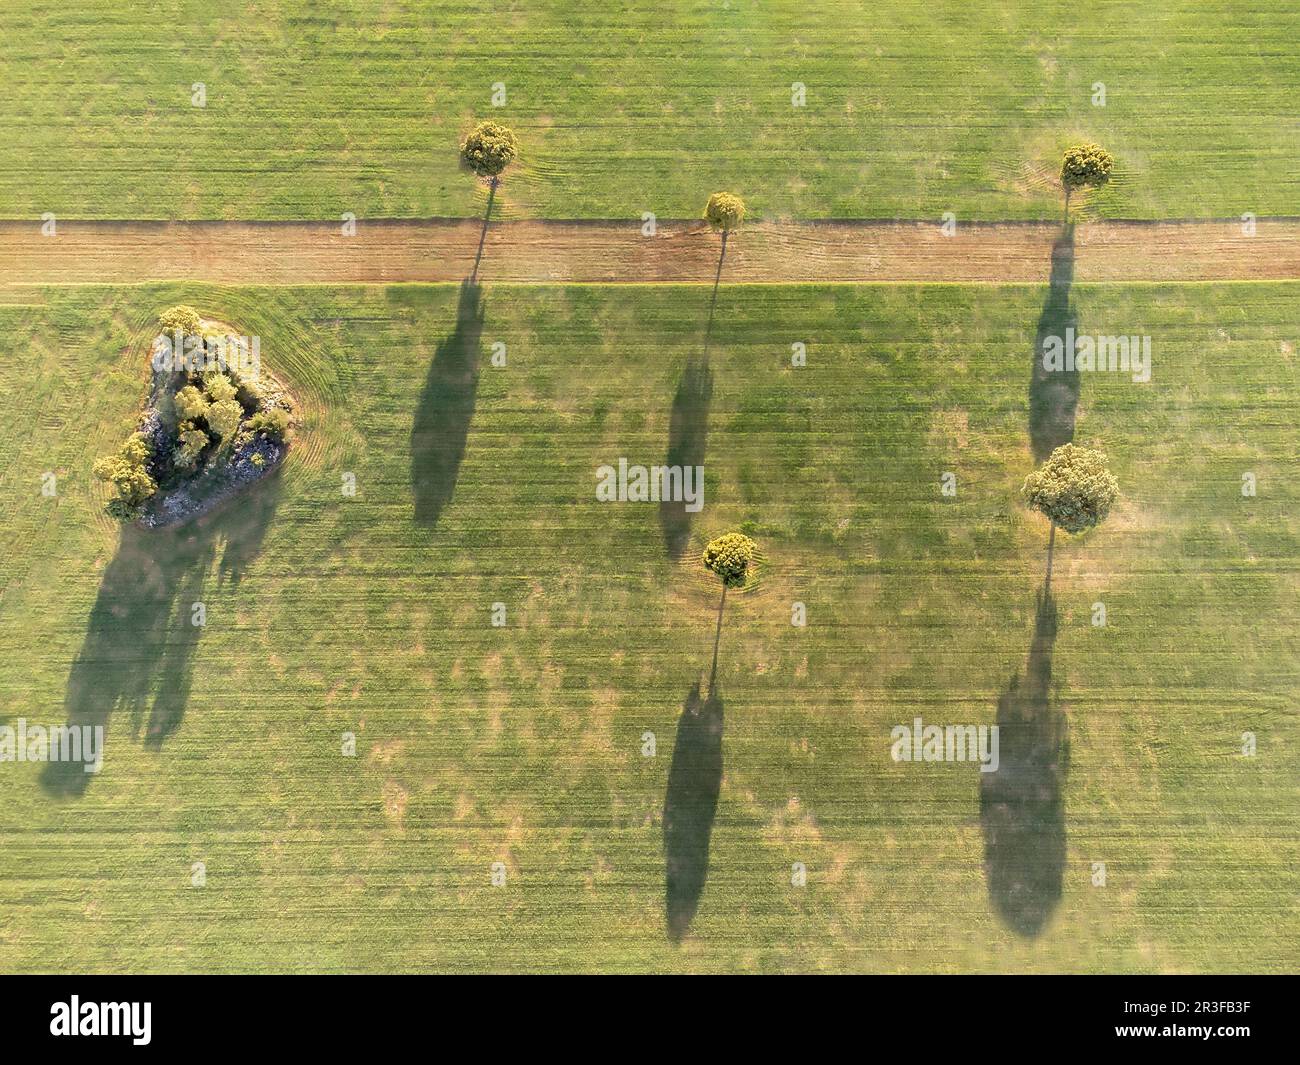 aerial image of a cereal crop field with a road crossing it and spreading trees that create long shadows, drone point of view, horizontal Stock Photo